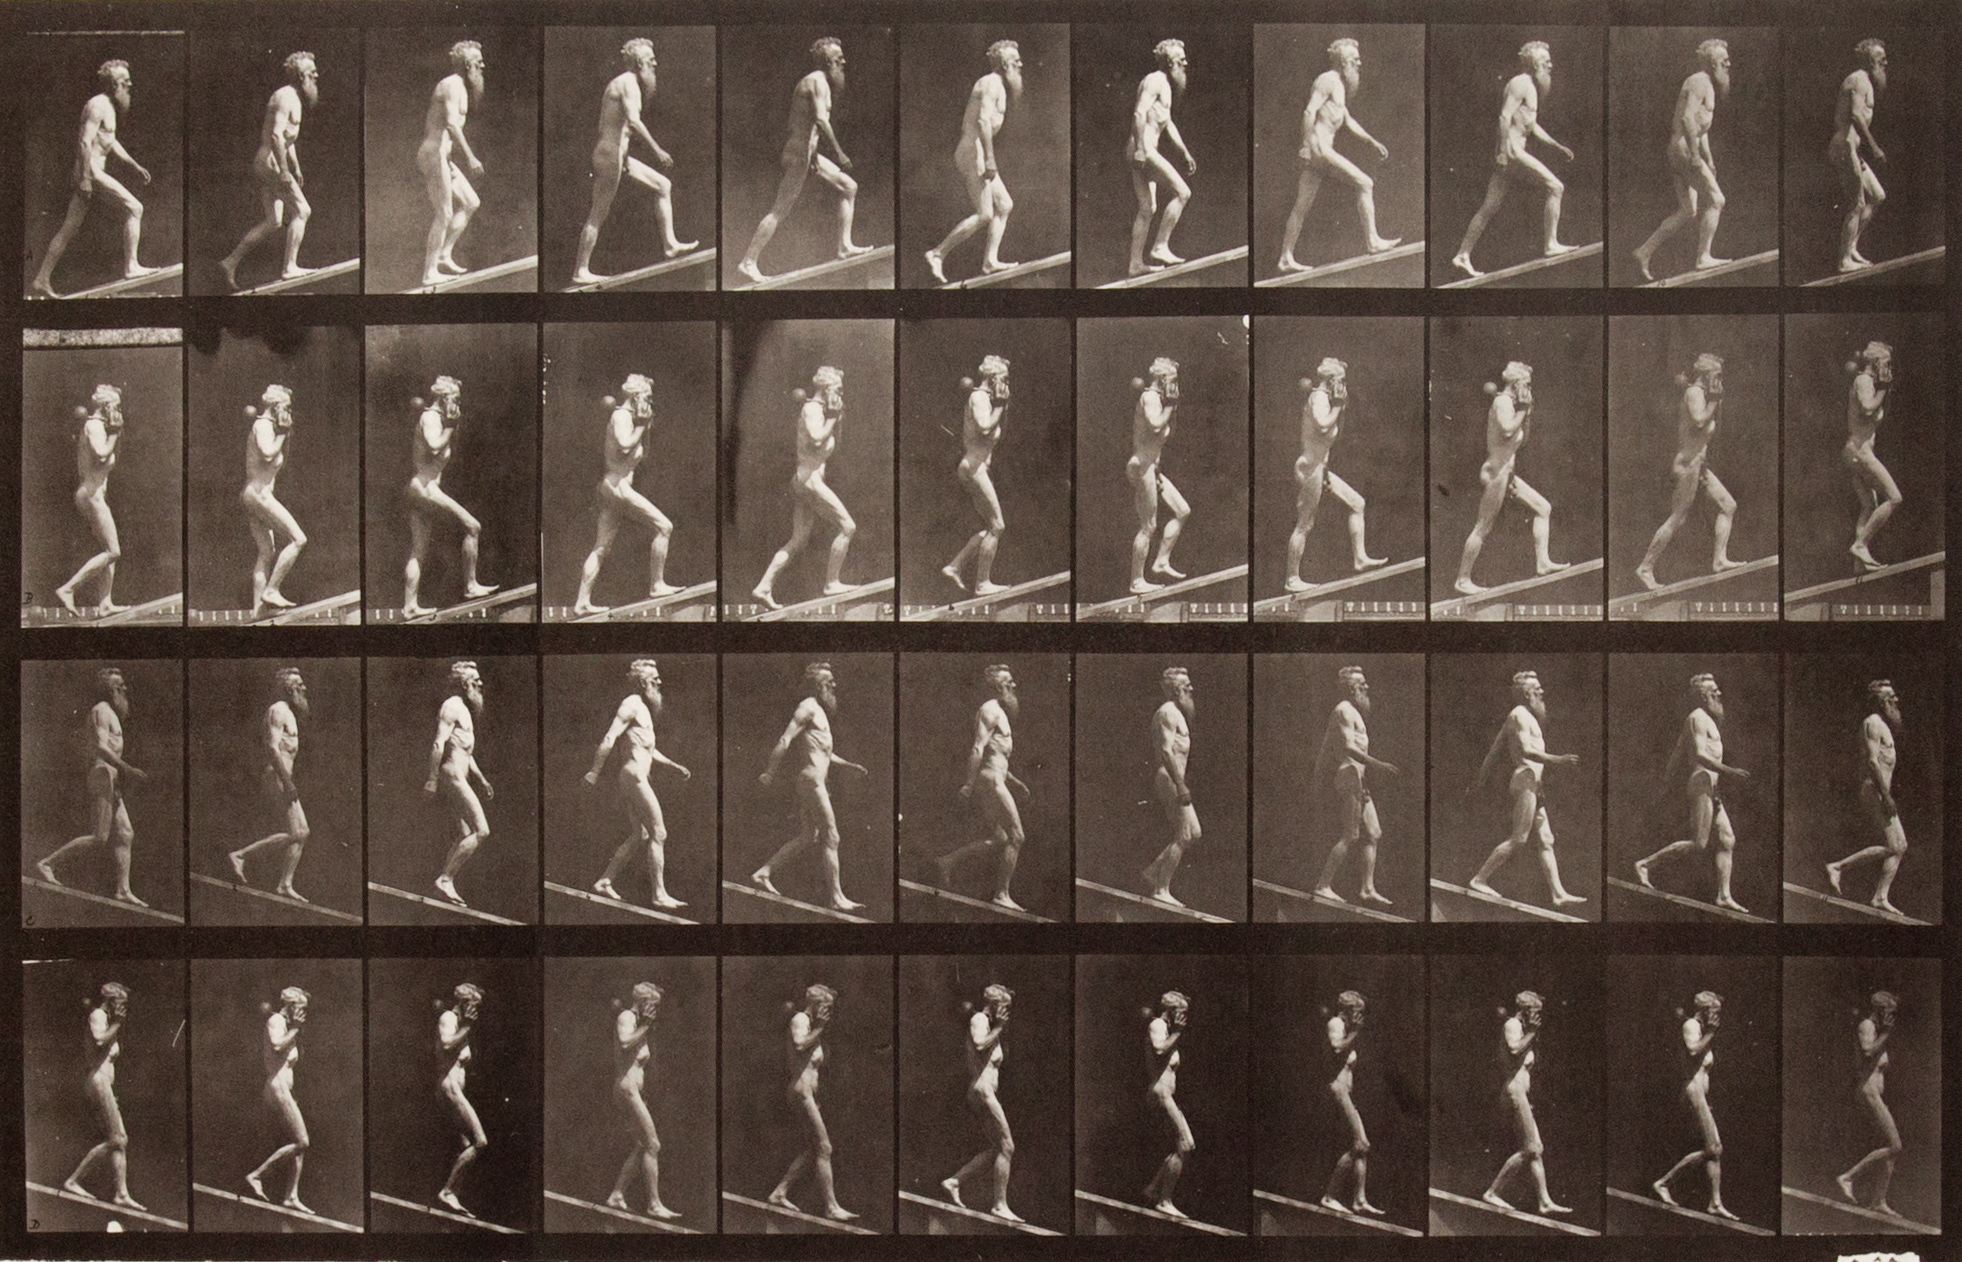 Sepia toned photograph with a grid of 44 panels showing a nude man walking on an incline. 12 panels show ascending motion; 12 show ascending motion carrying a dumbbell; 12 show descending motion; 12 show descending motion with a dumbbell.